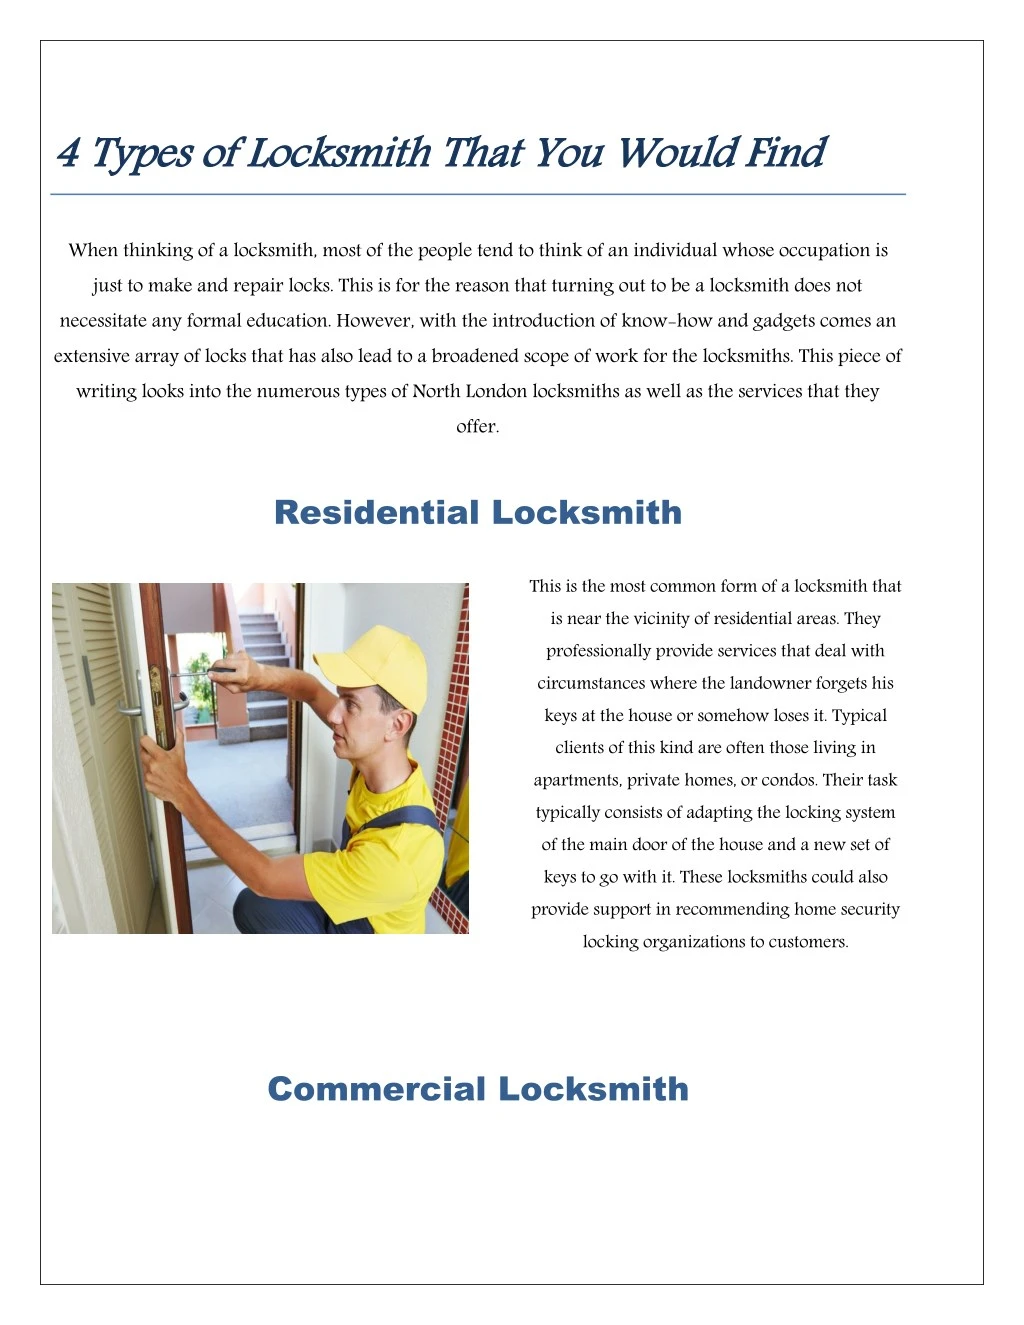 4 types of locksmith that you would find